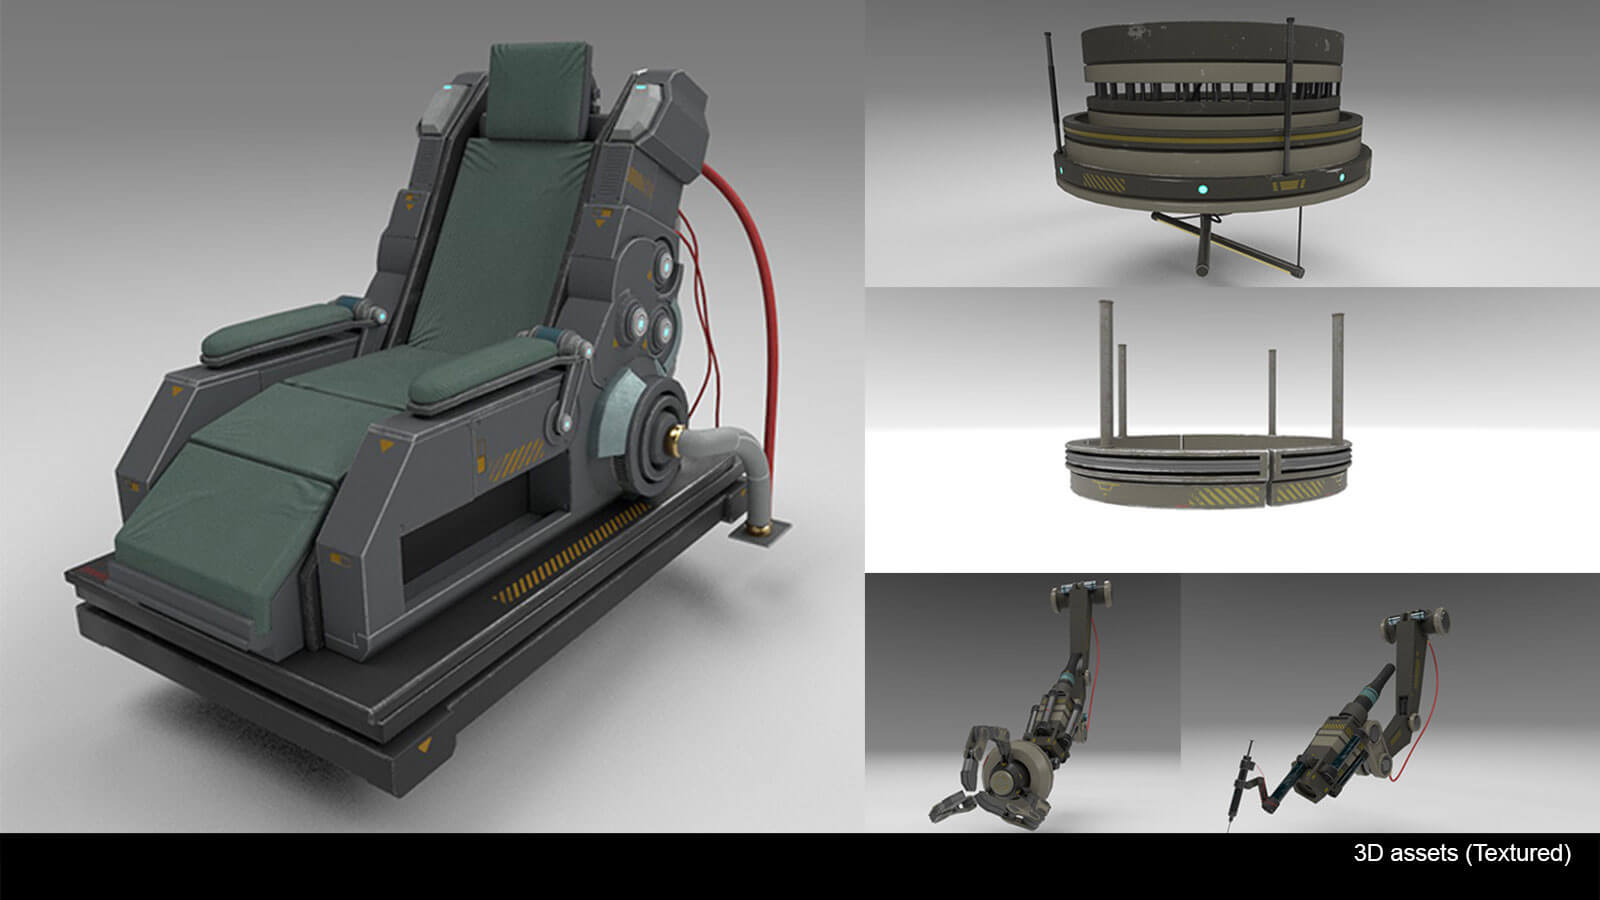 3D modeled items that were used in the scene, including a chair and various mechanical parts